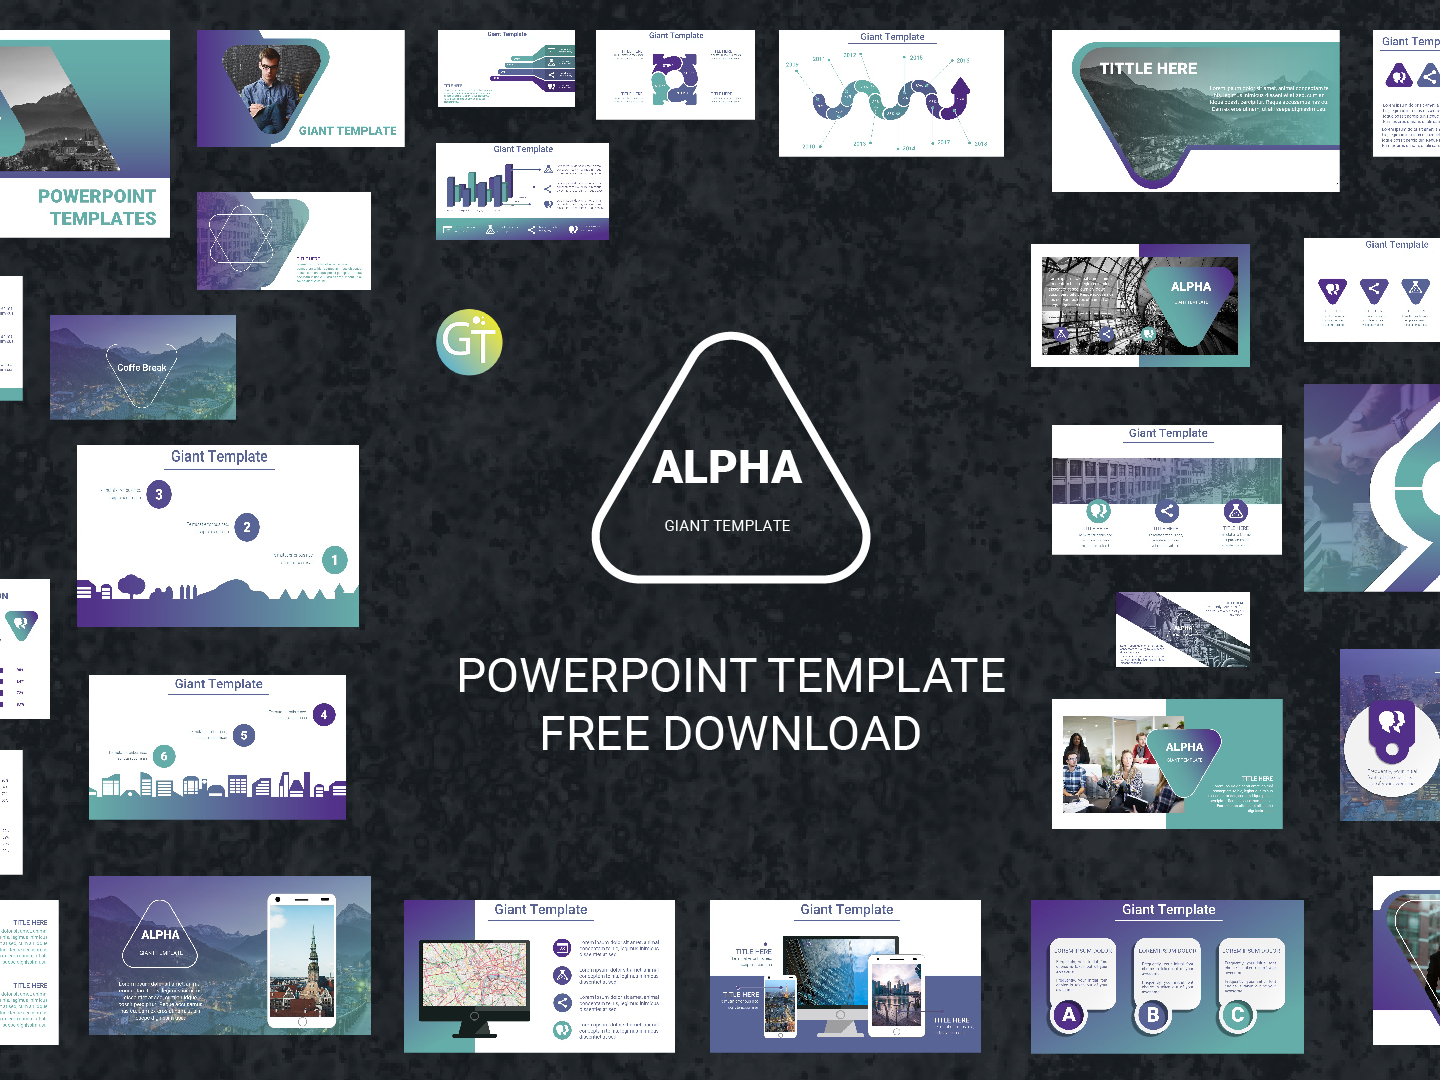 morph-animation-powerpoint-template-by-giant-template-on-dribbble